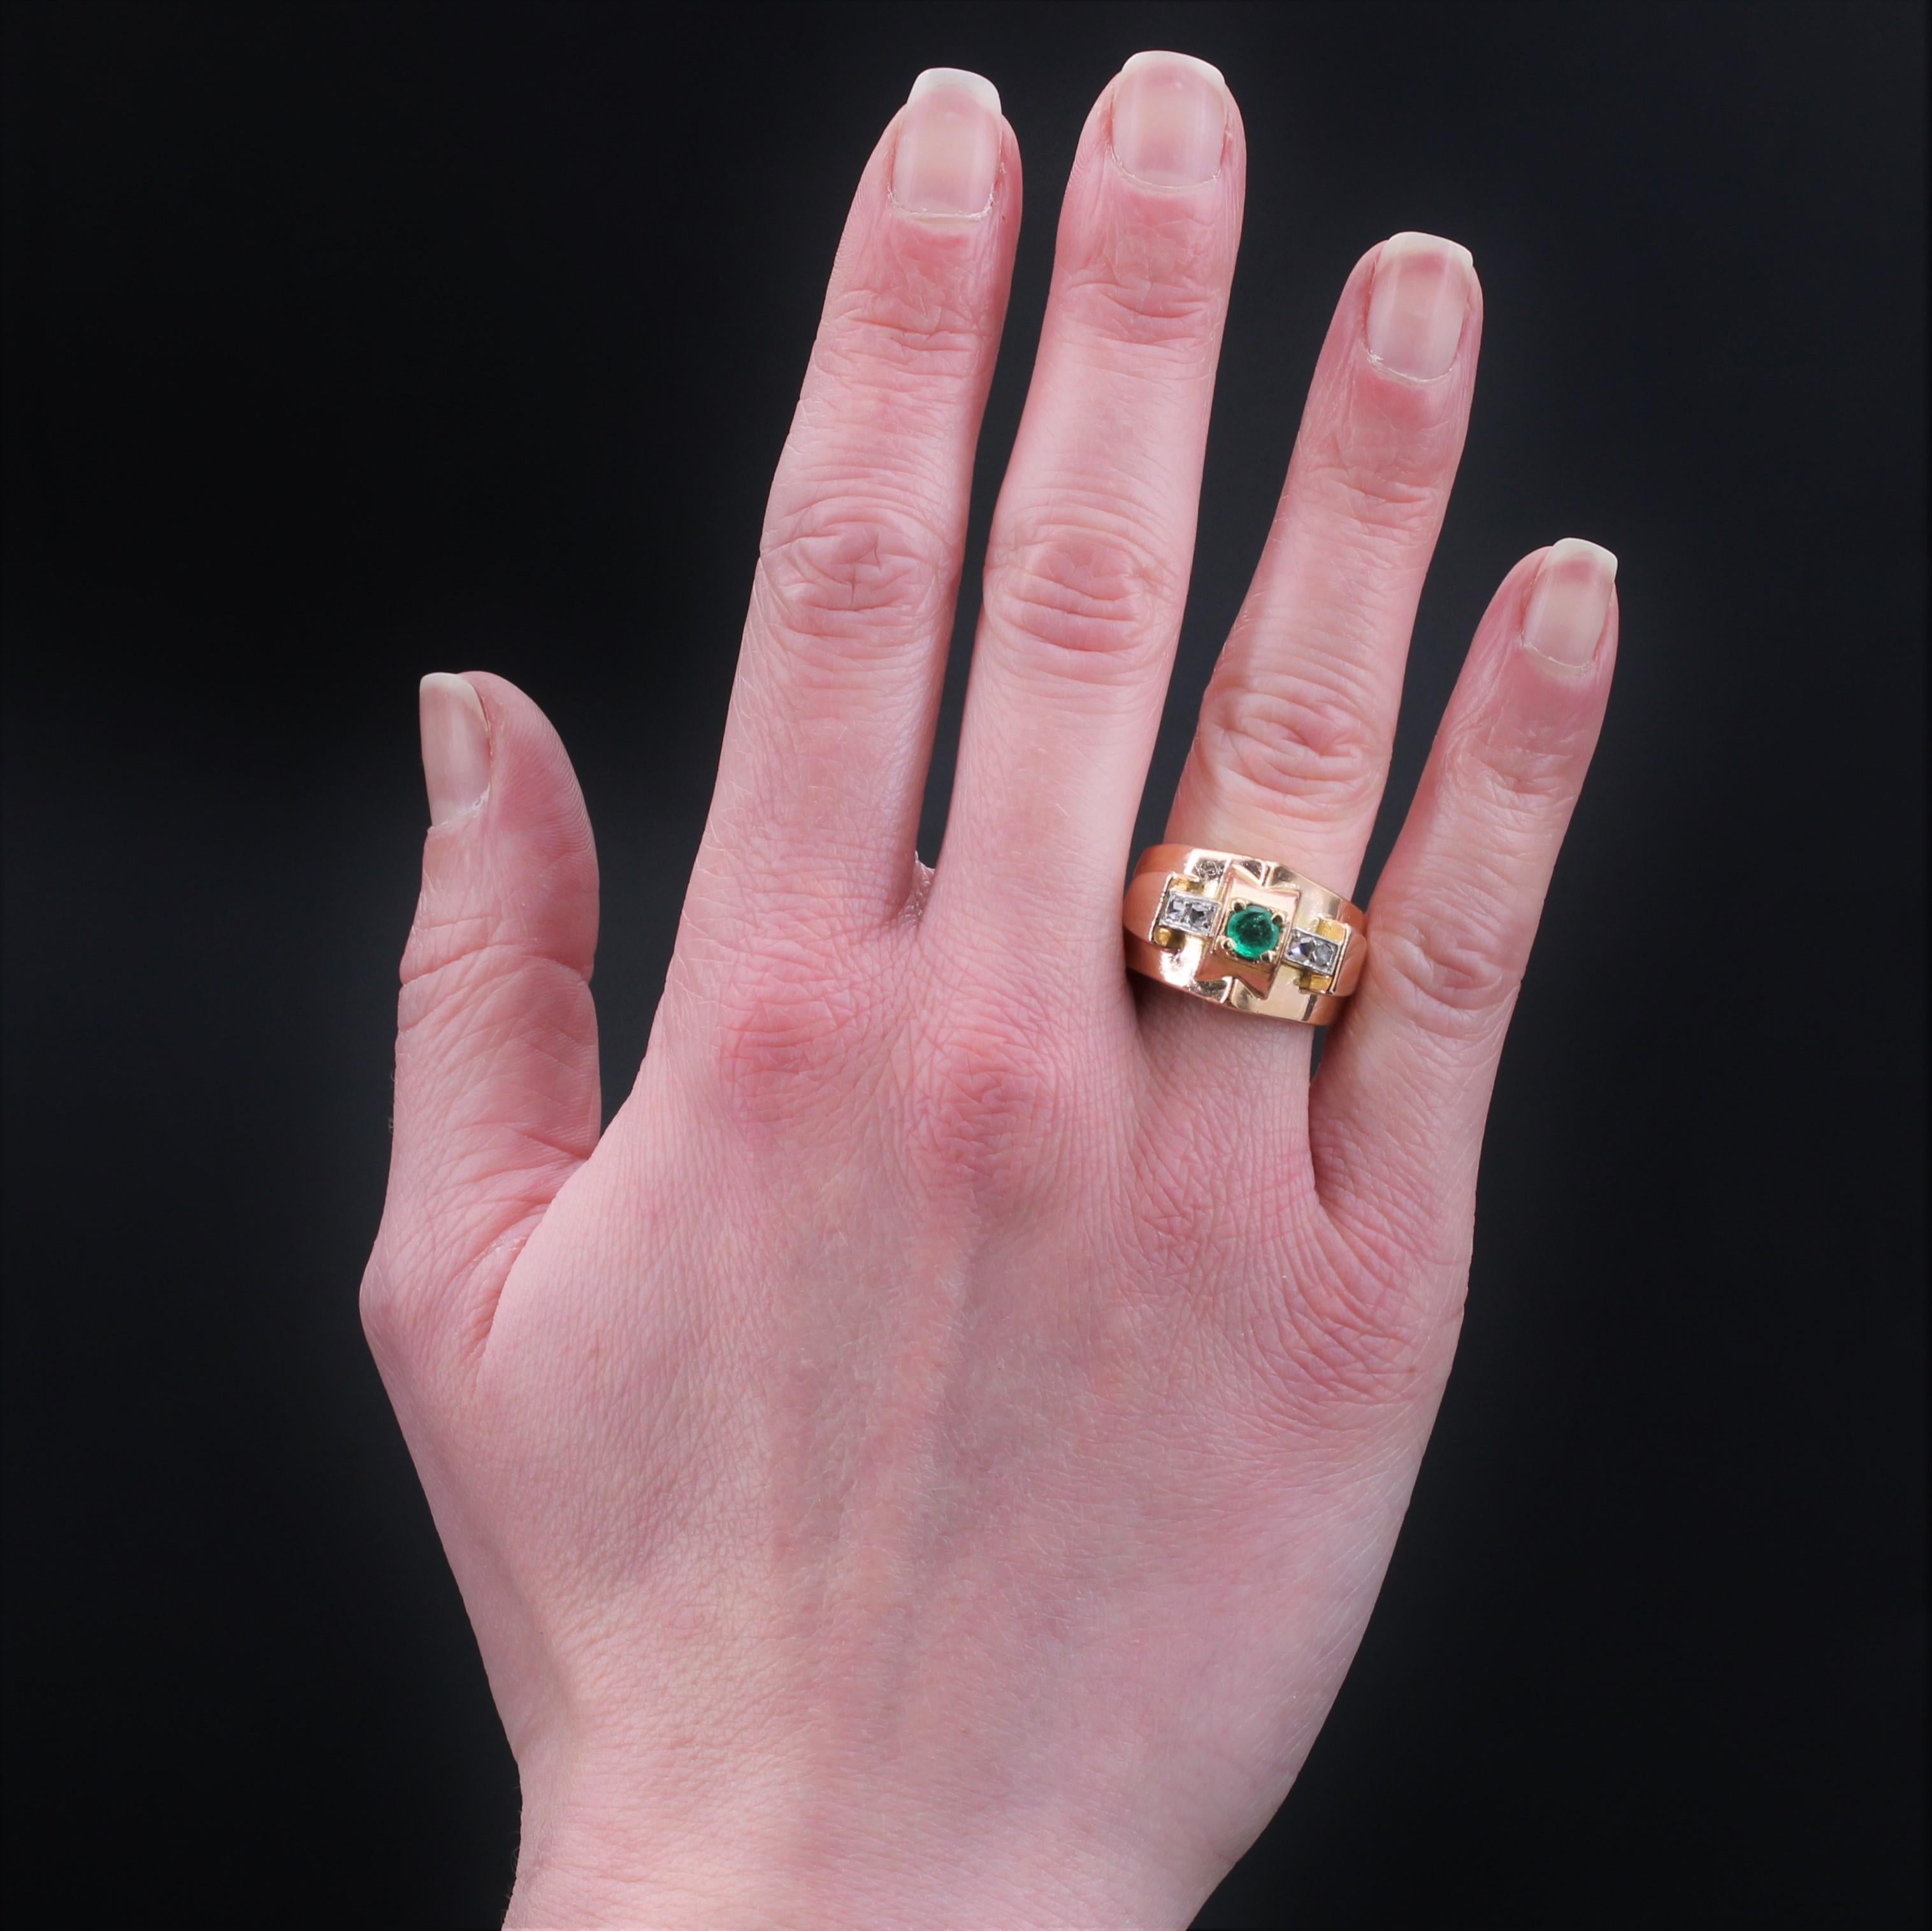 Ring in 18 karat rose gold, owl hallmark, and platinum, mascaron hallmark.
Tank ring with the characteristic lines of its time, it is decorated on its top with a round emerald supported on both sides by 2x2 rose-cut diamonds set on platinum.
Weight